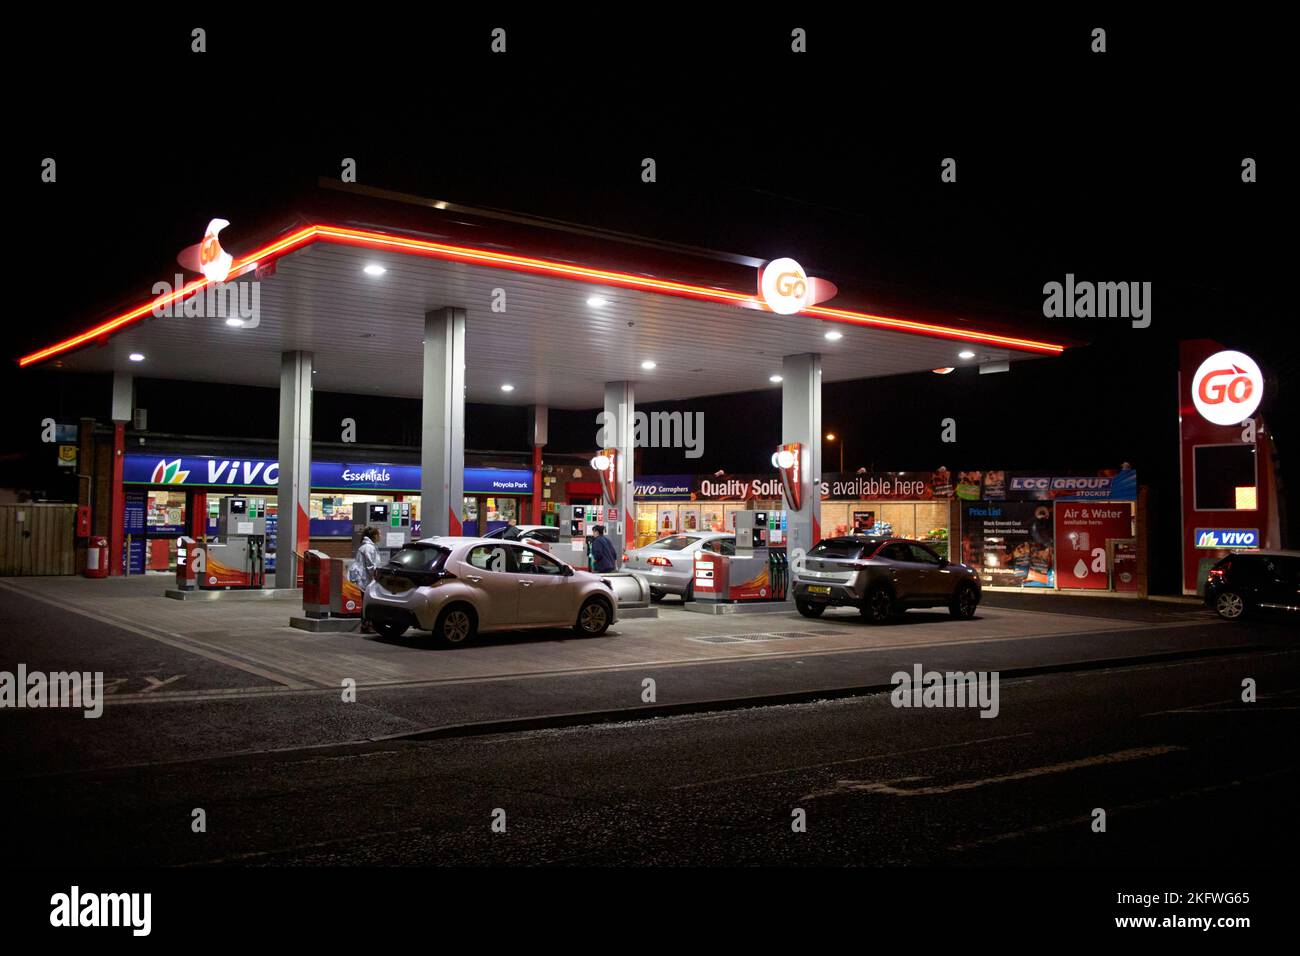 go garage service station at night with cars refuelling in the uk Stock Photo